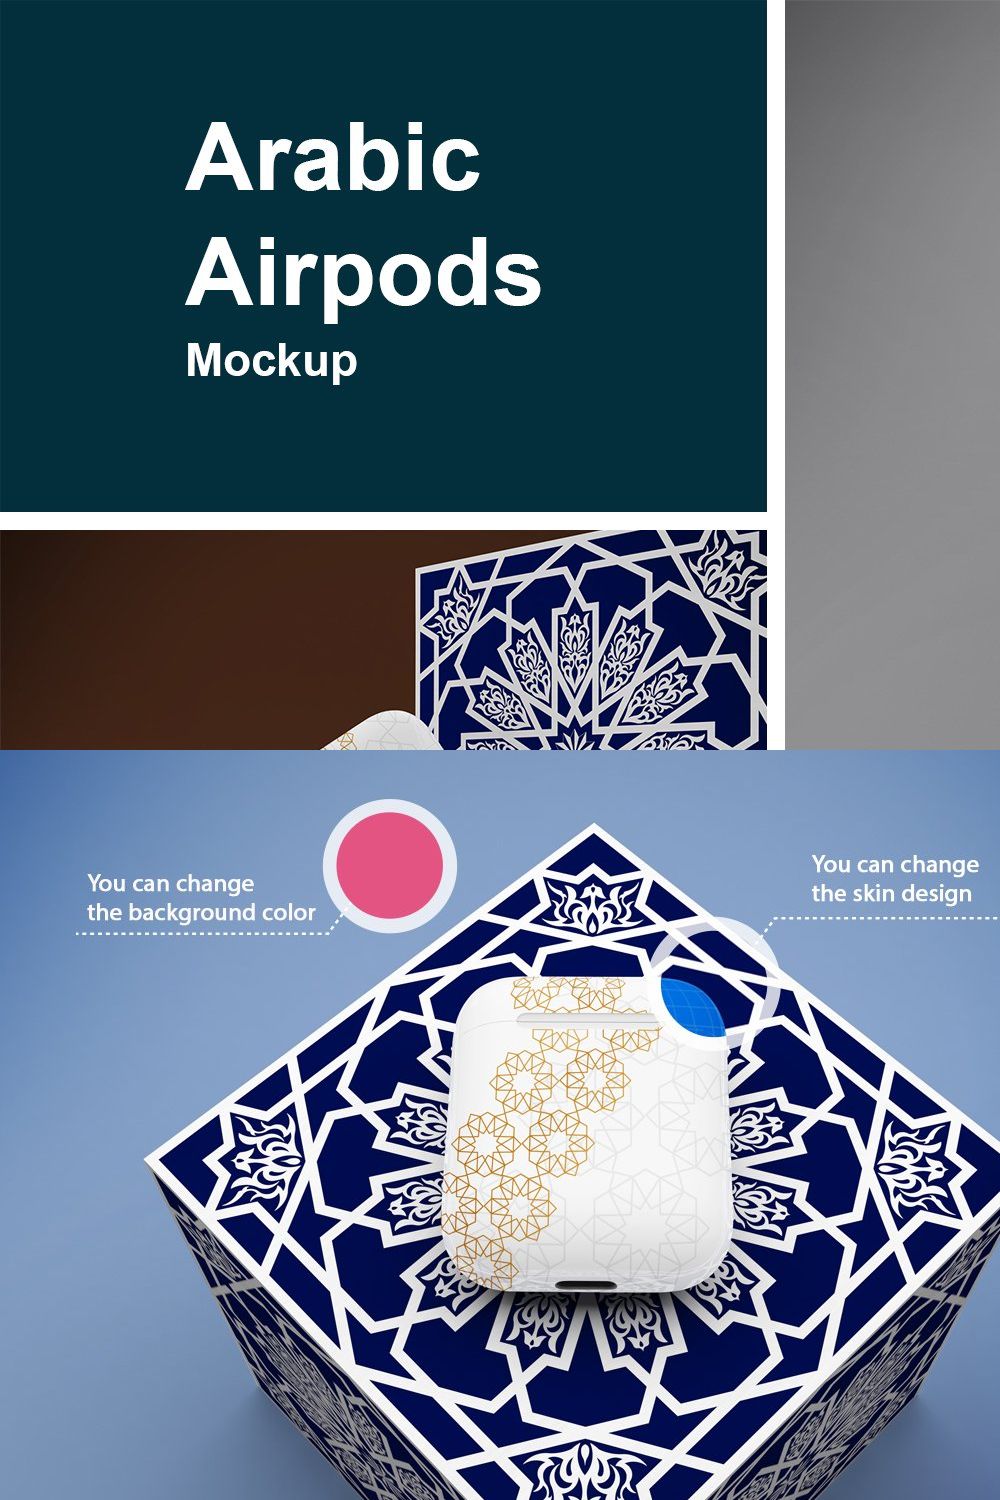 Arabic Airpods mockup pinterest preview image.